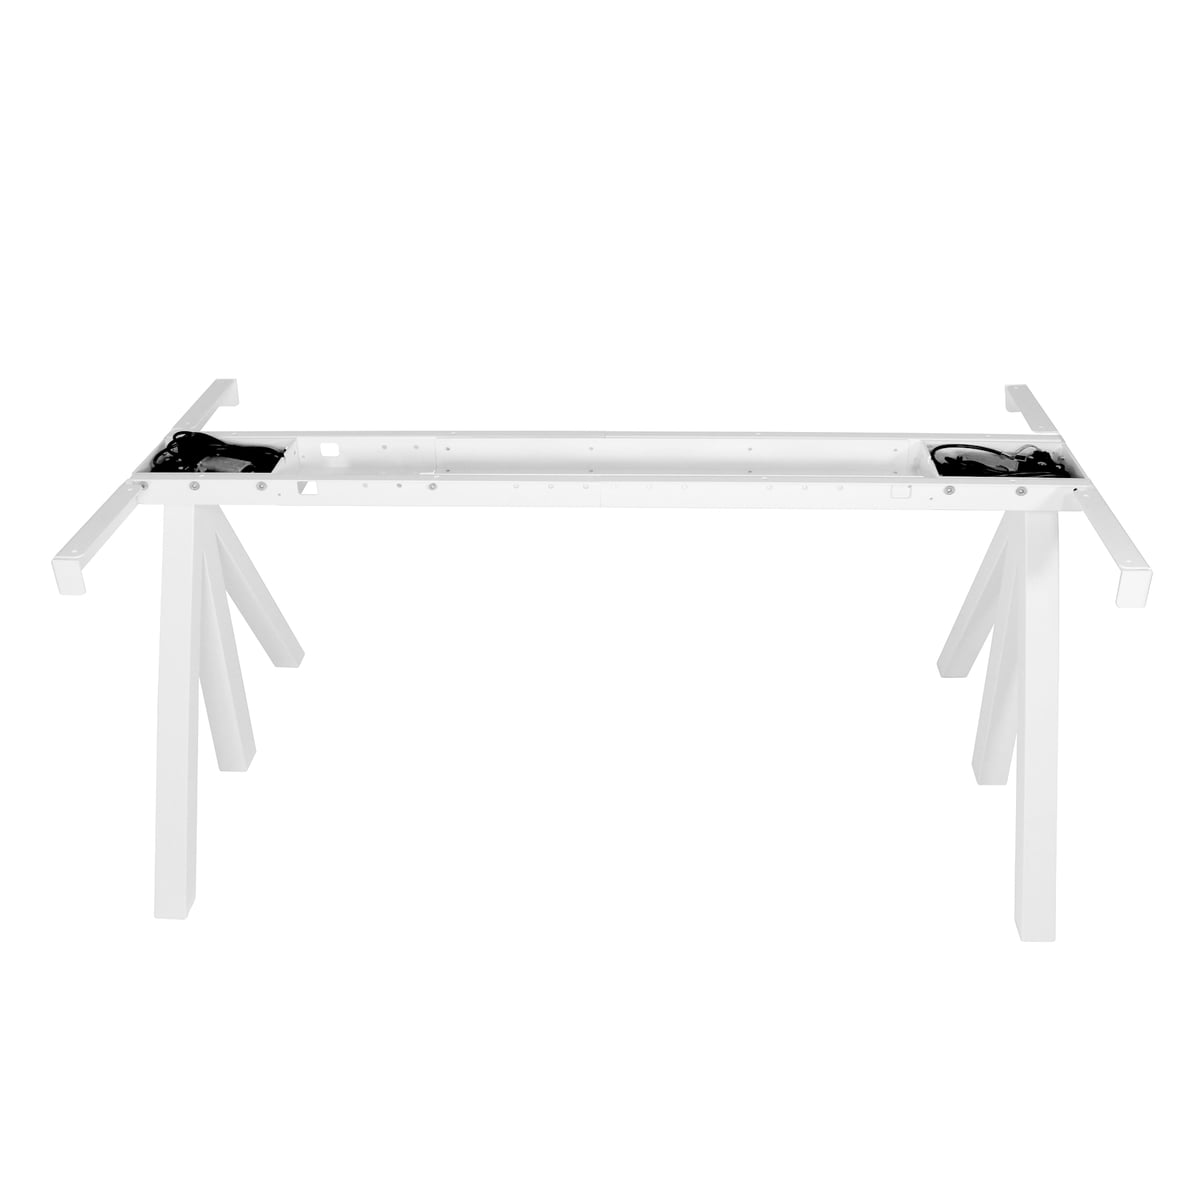 The Works Desk By String In Design - How Height Adjustable Table Works